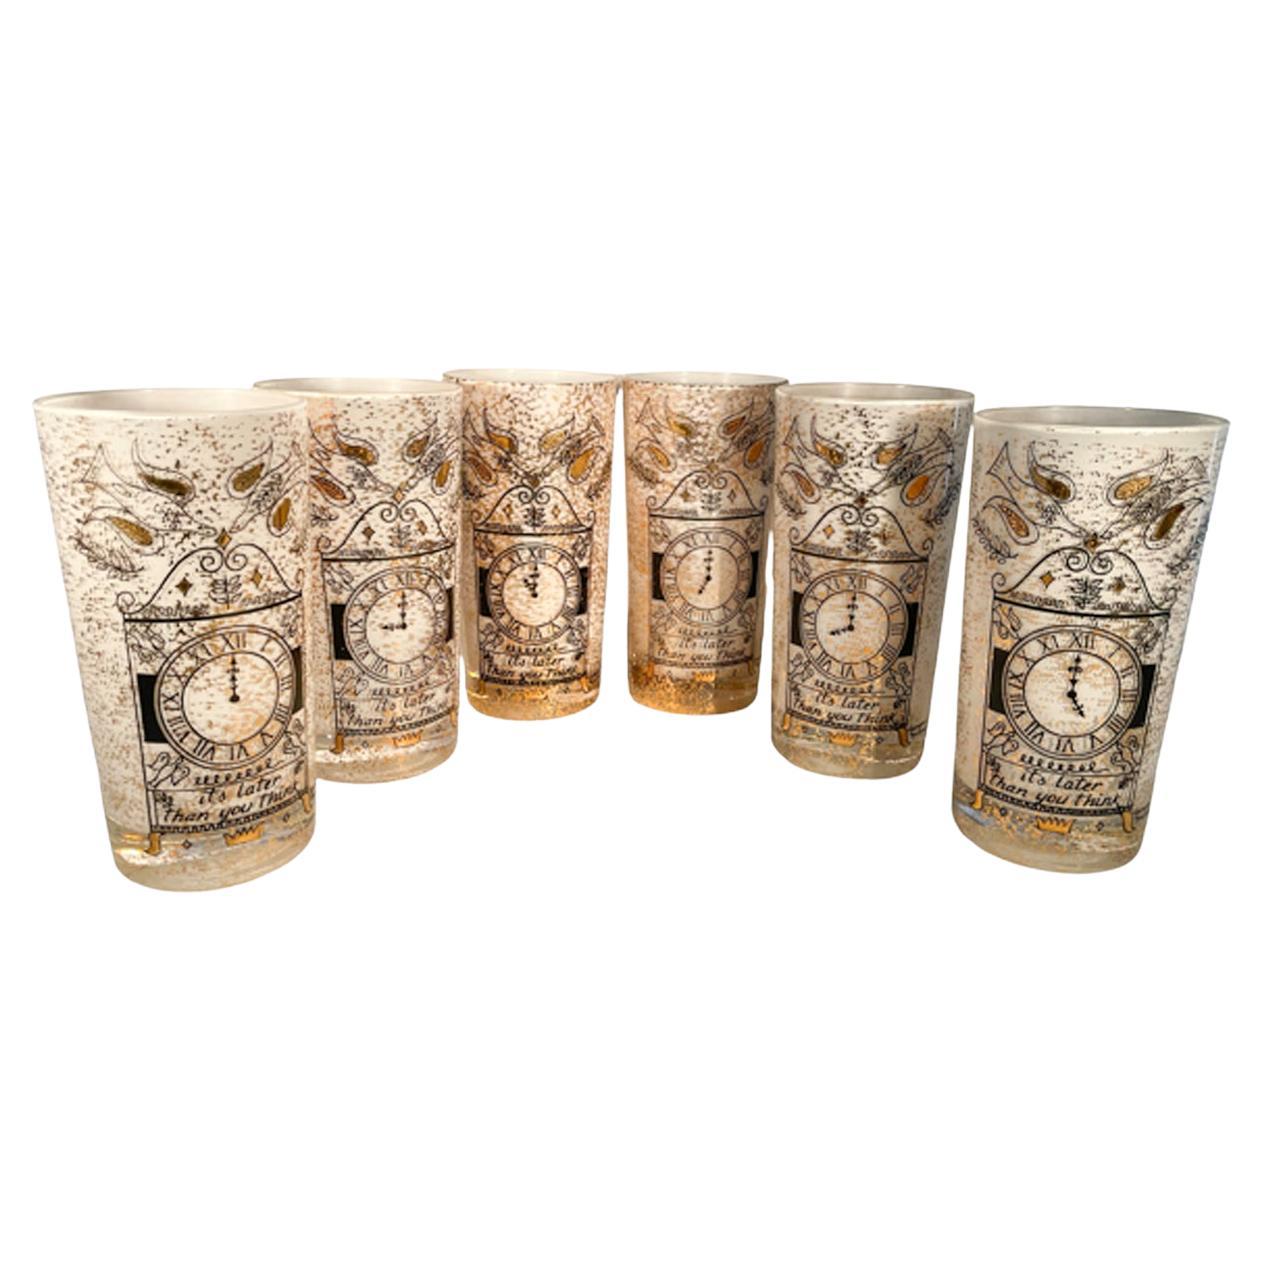 Vintage Georges Briard, White "It's Later Than You Think" Highball Glasses